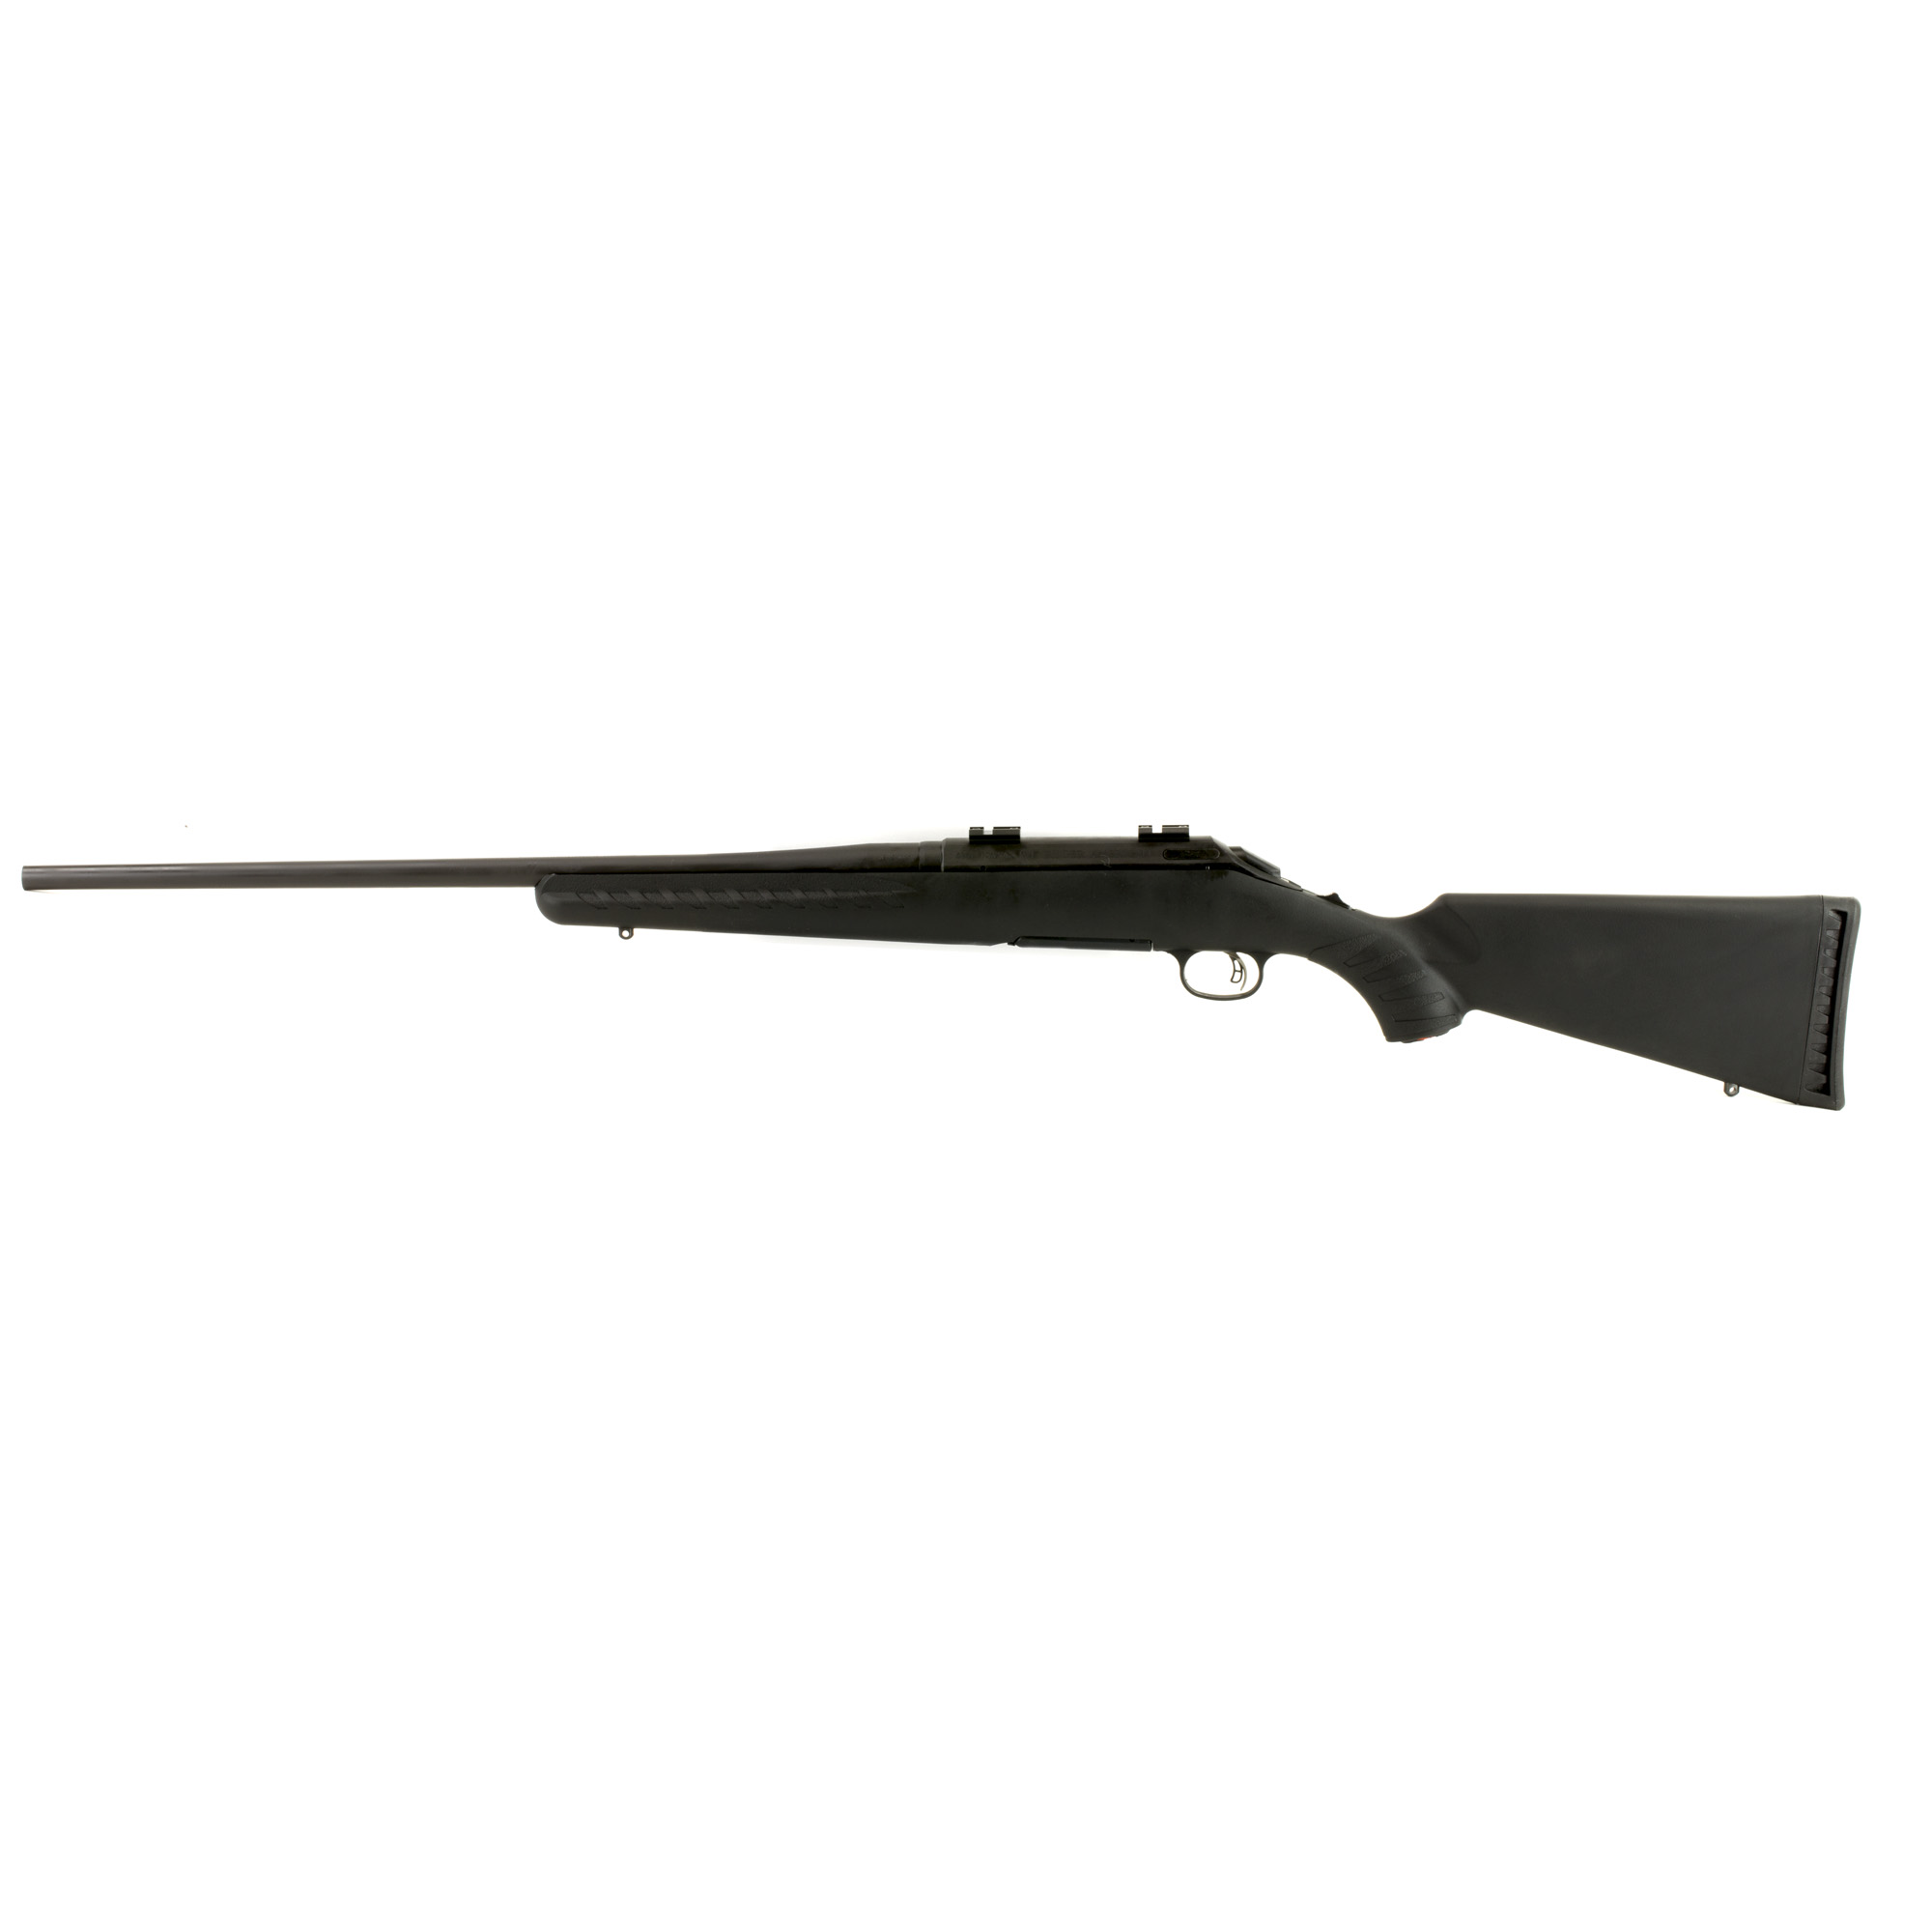 RUGER AMERICAN 243WIN 22 BLK 4RD